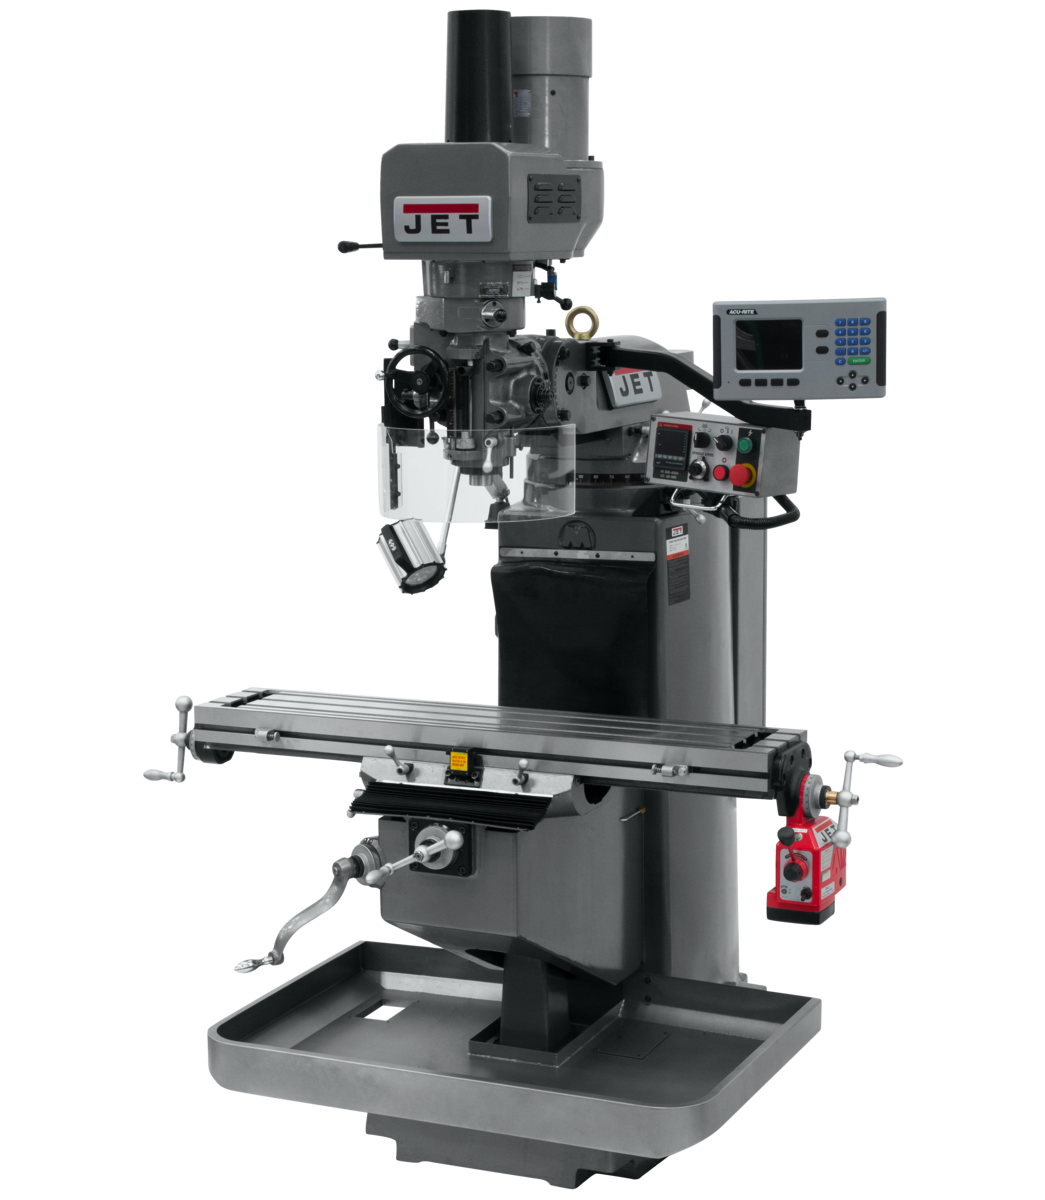 JTM-949EVS Mill With Acu-Rite 203 DRO With X-Axis Powerfeed and Air Powered Drawbar